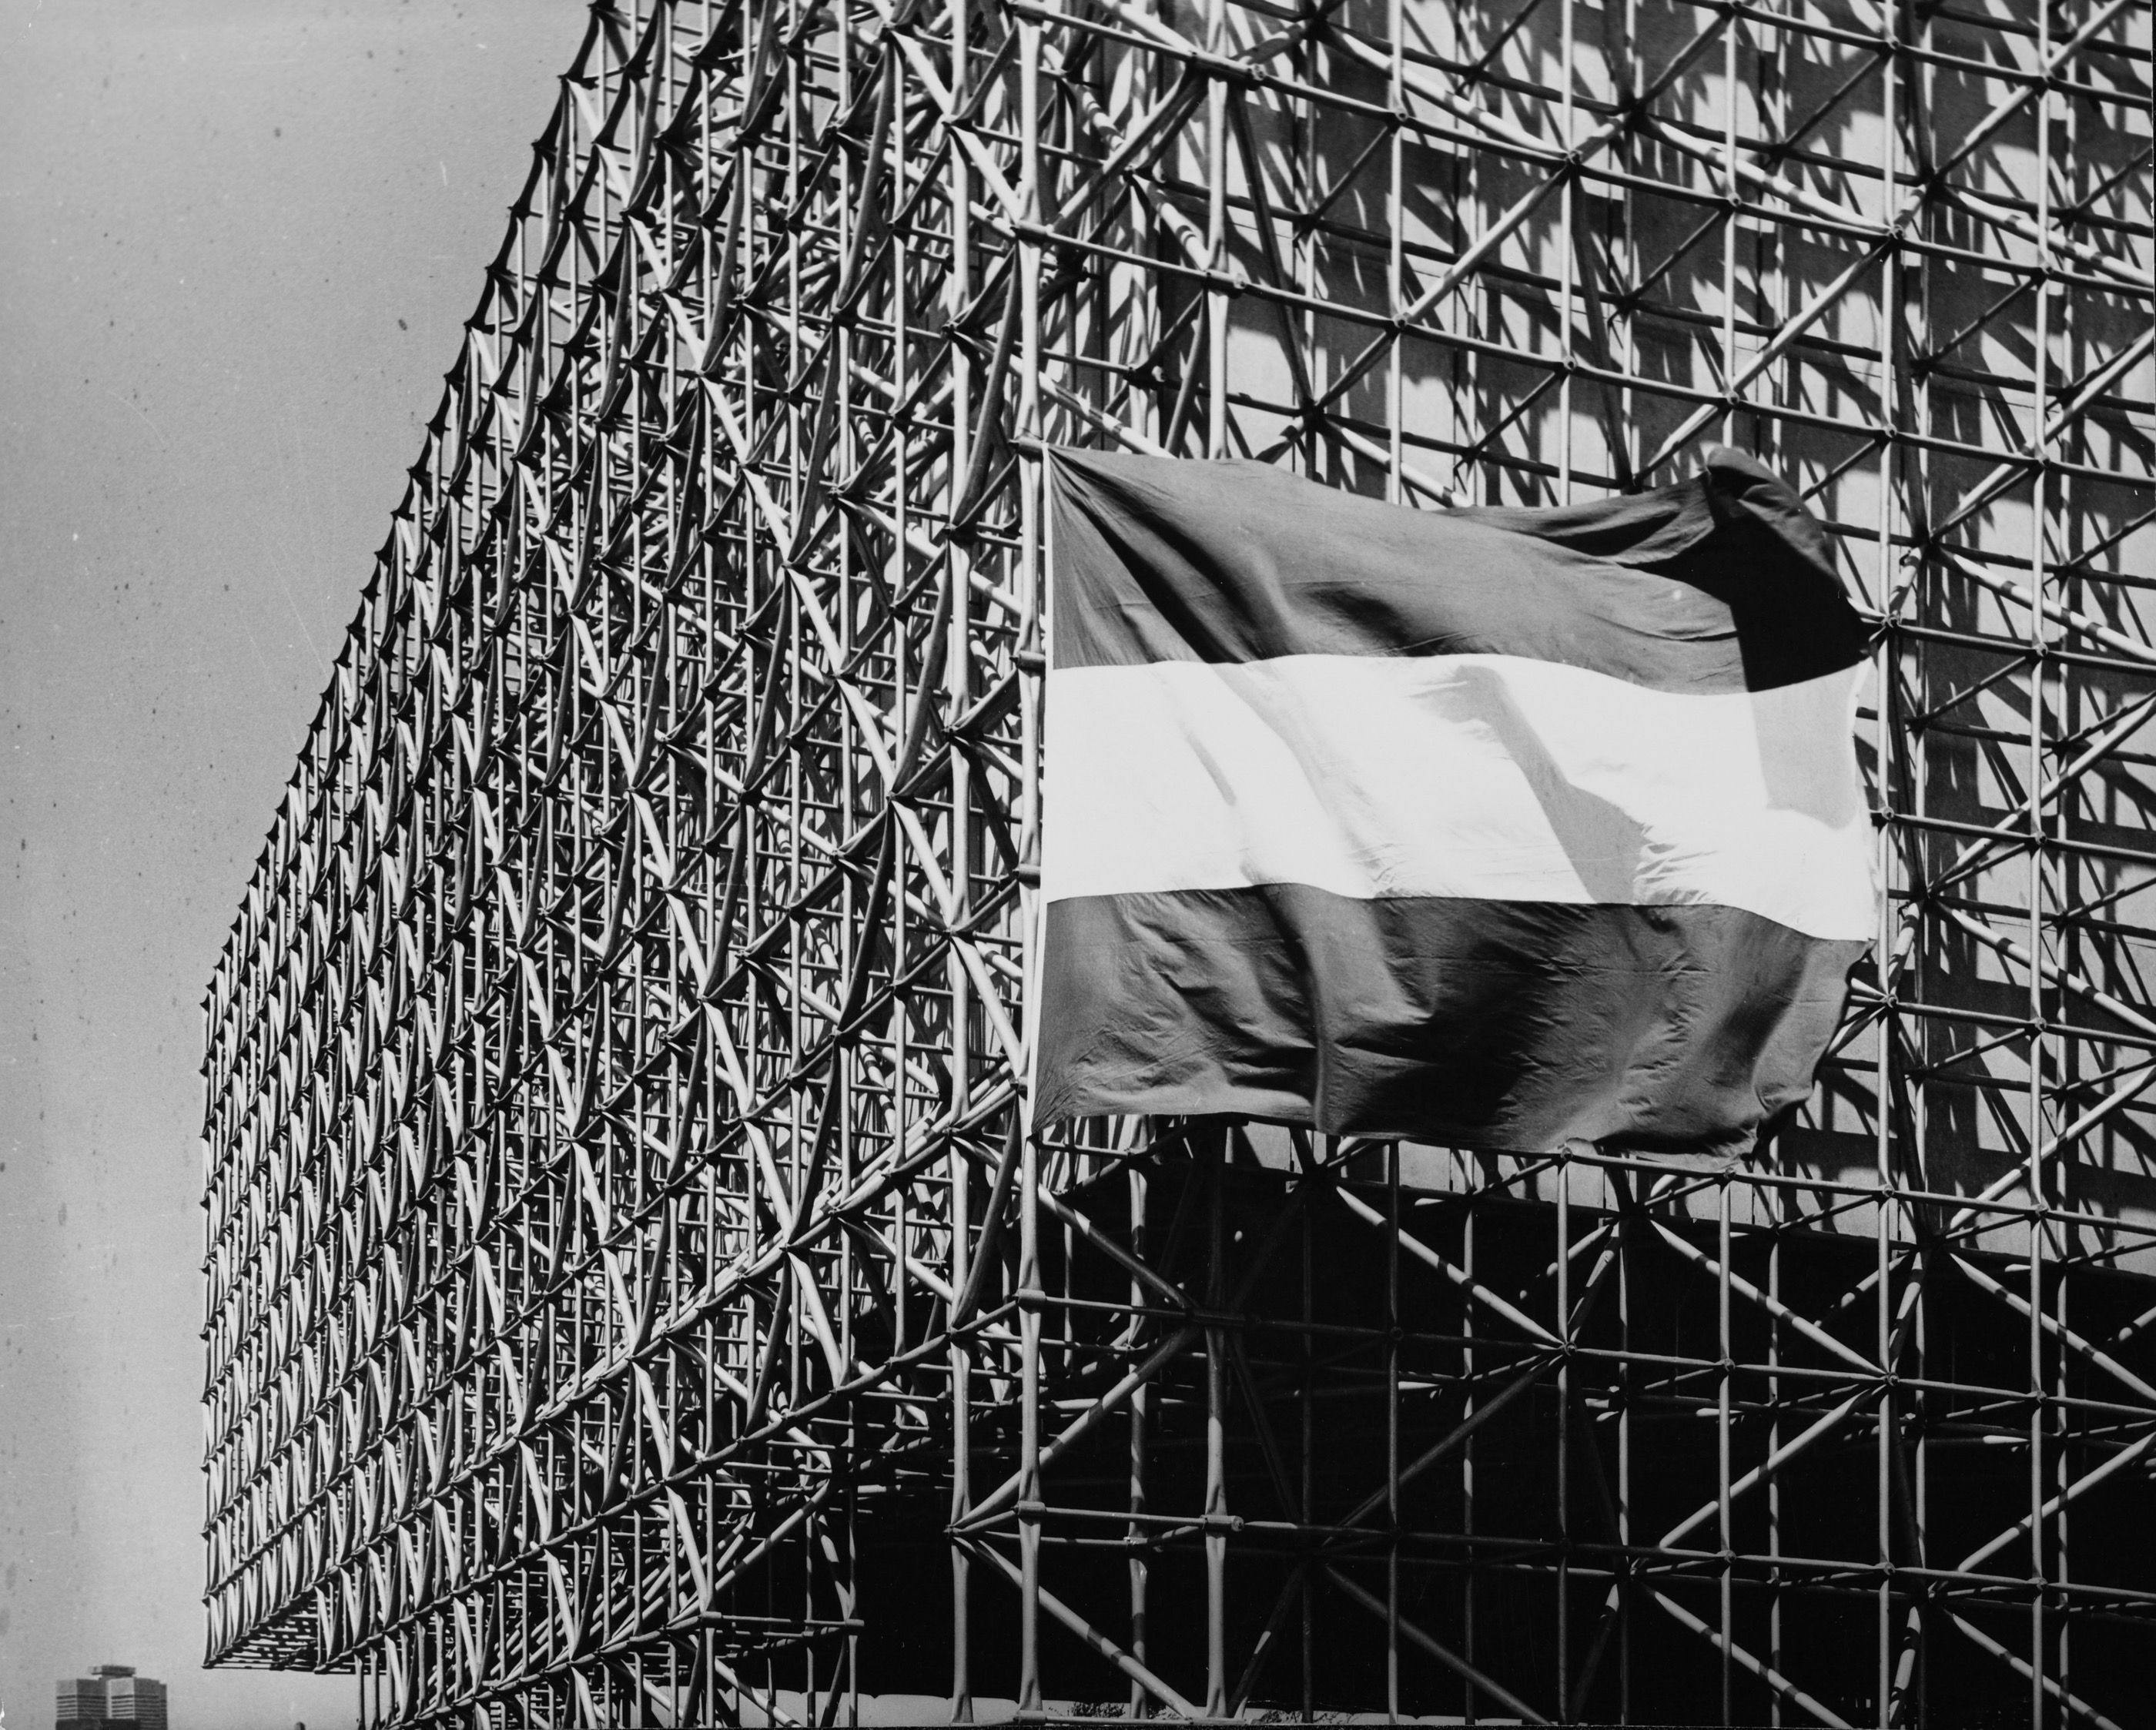  Dutch pavilion World Expo Montreal, Canada, 1967. Architects: W. Eijkelenboom and A. Middelhoek. Photographer unknown. Collection National Archives of the Netherlands. 